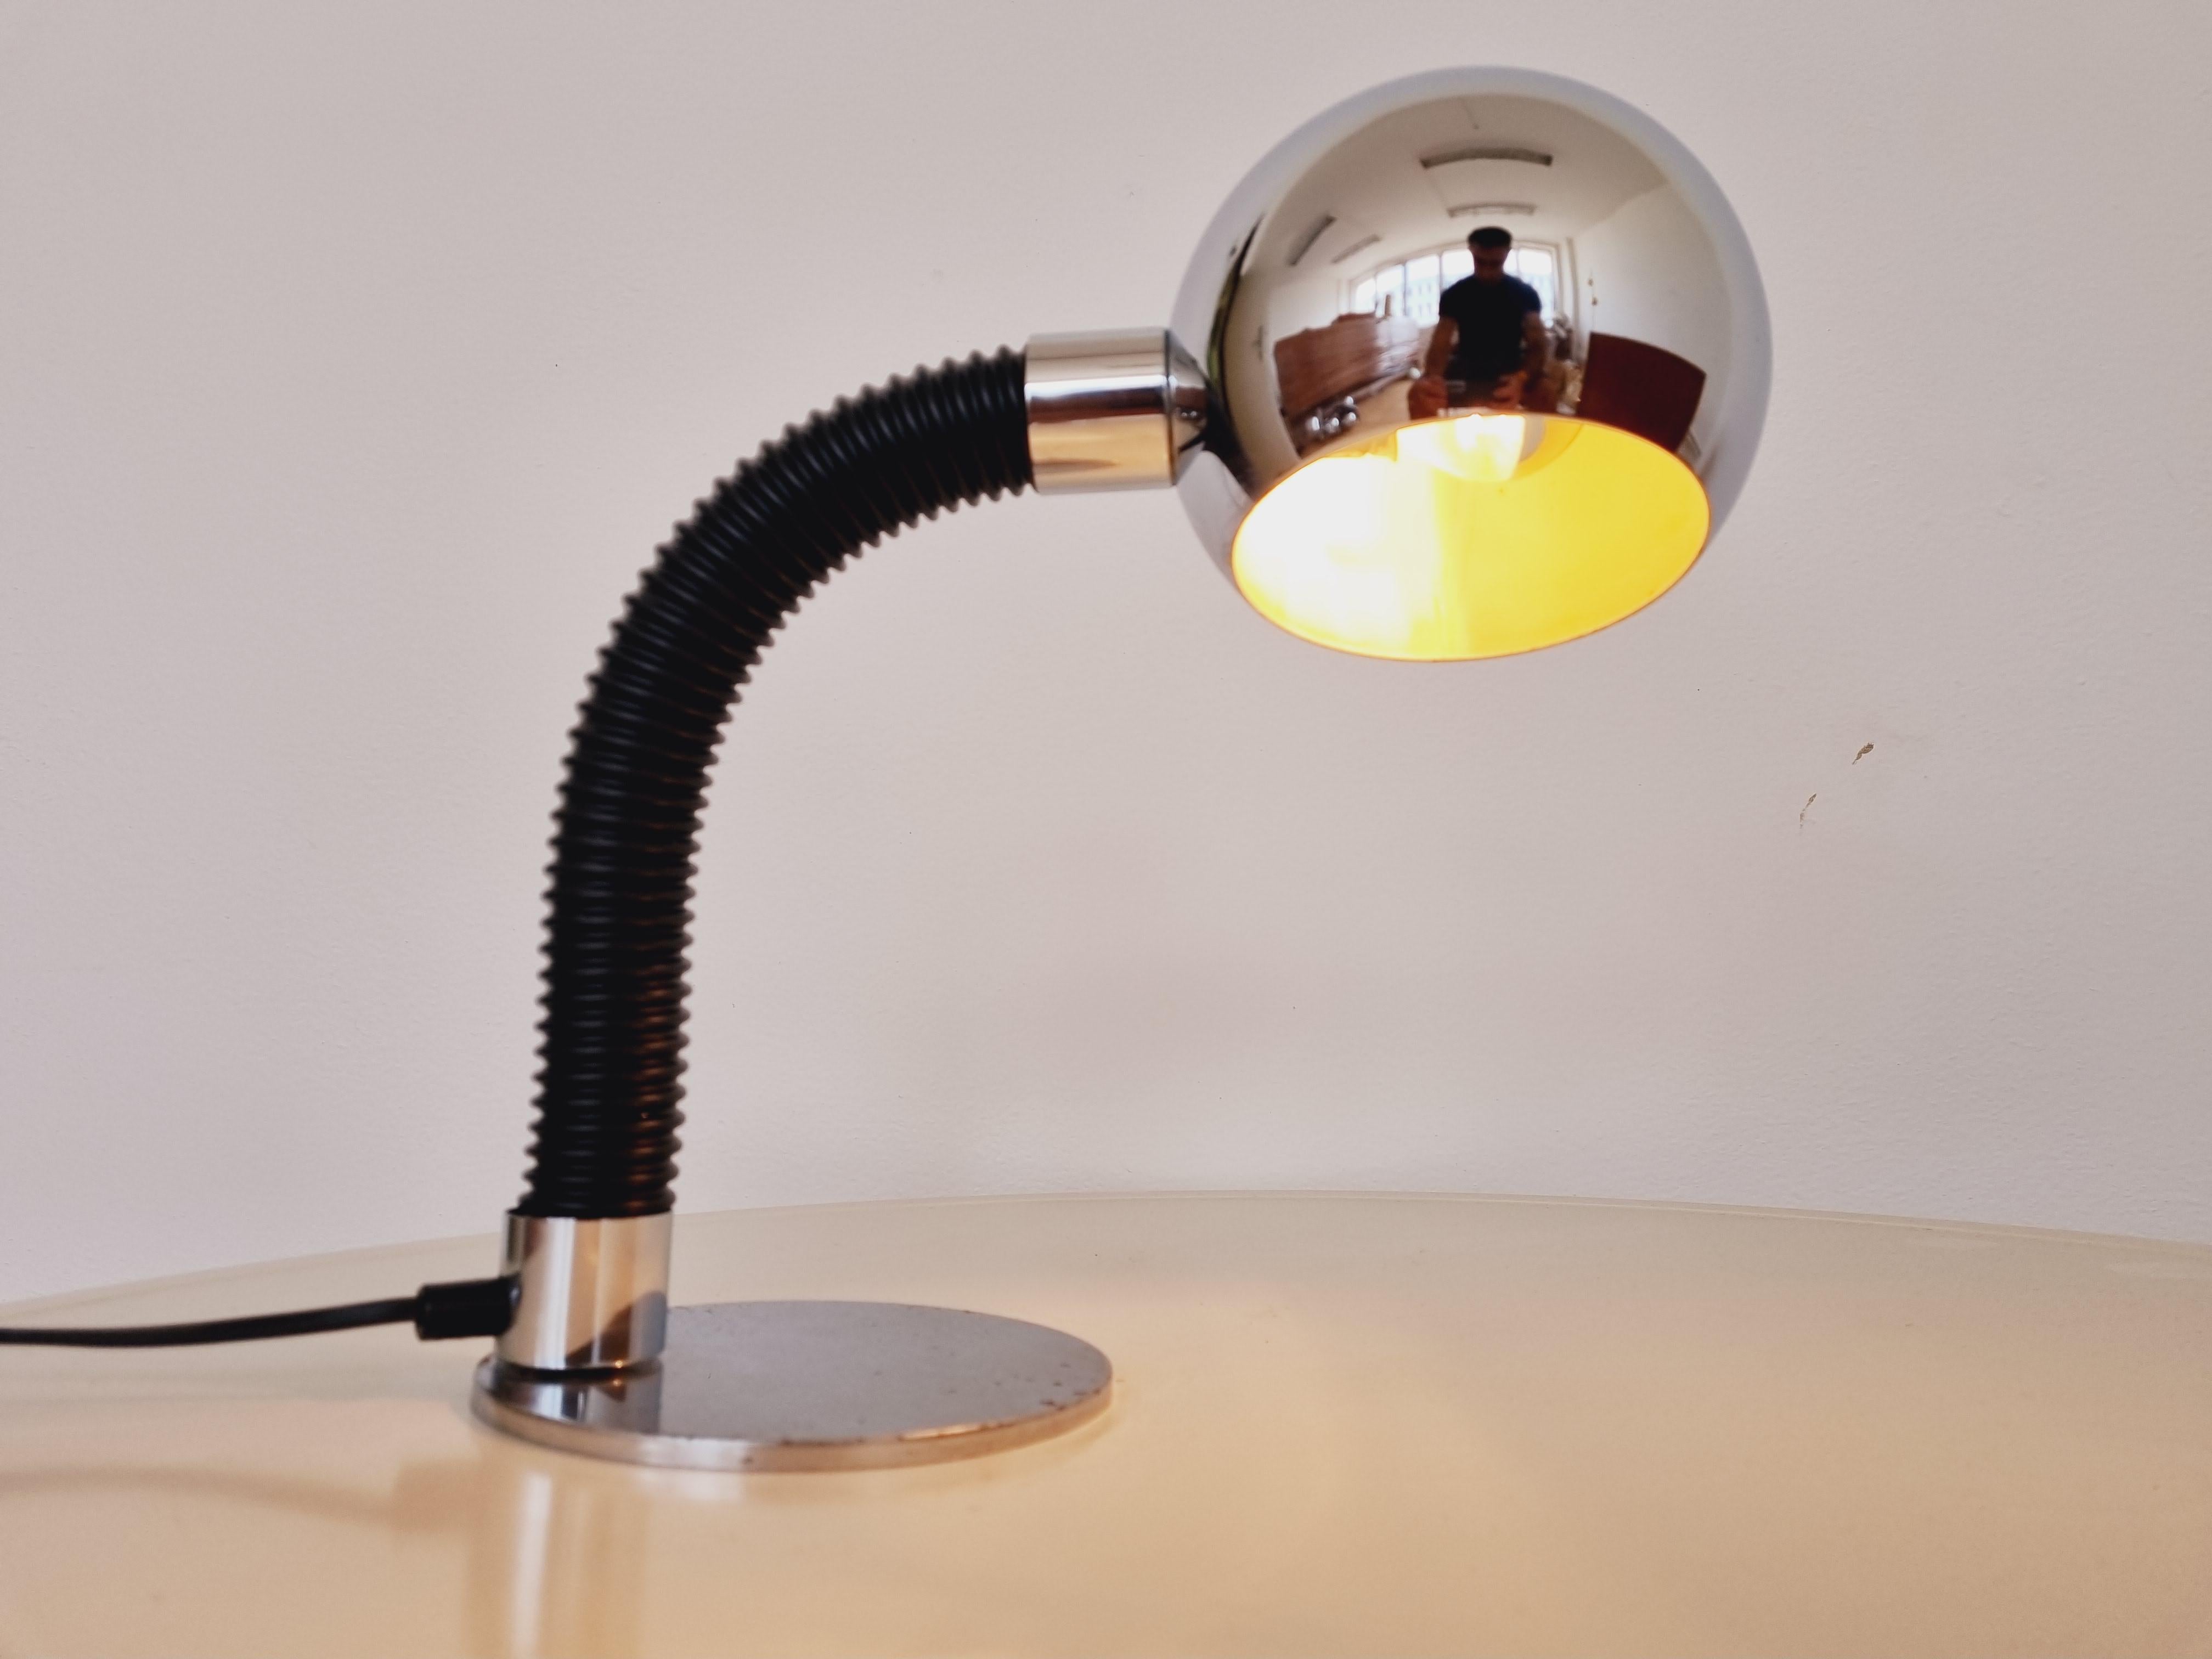 Pair of Midcentury Table Lamp Targetti Sankey, Space Age, Italy, 1970s For Sale 5